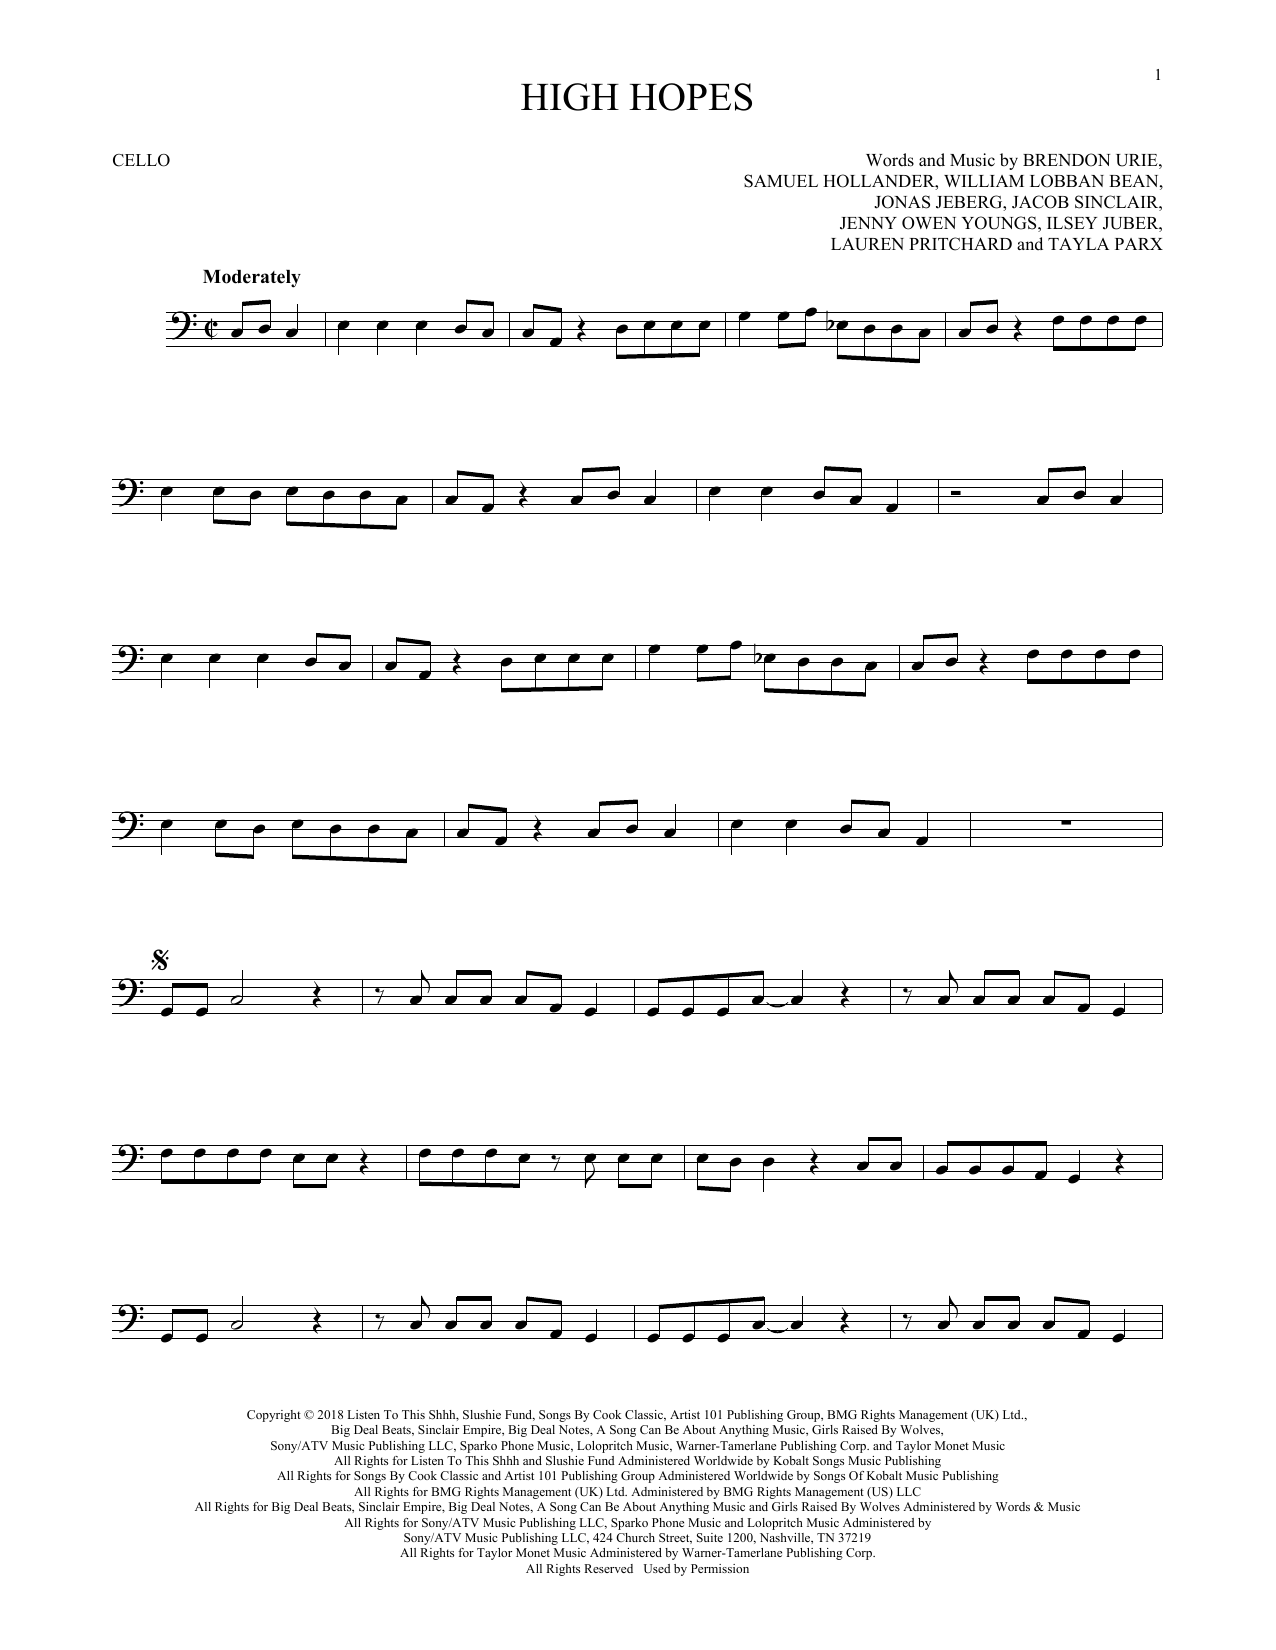 Download Panic! At The Disco High Hopes Sheet Music